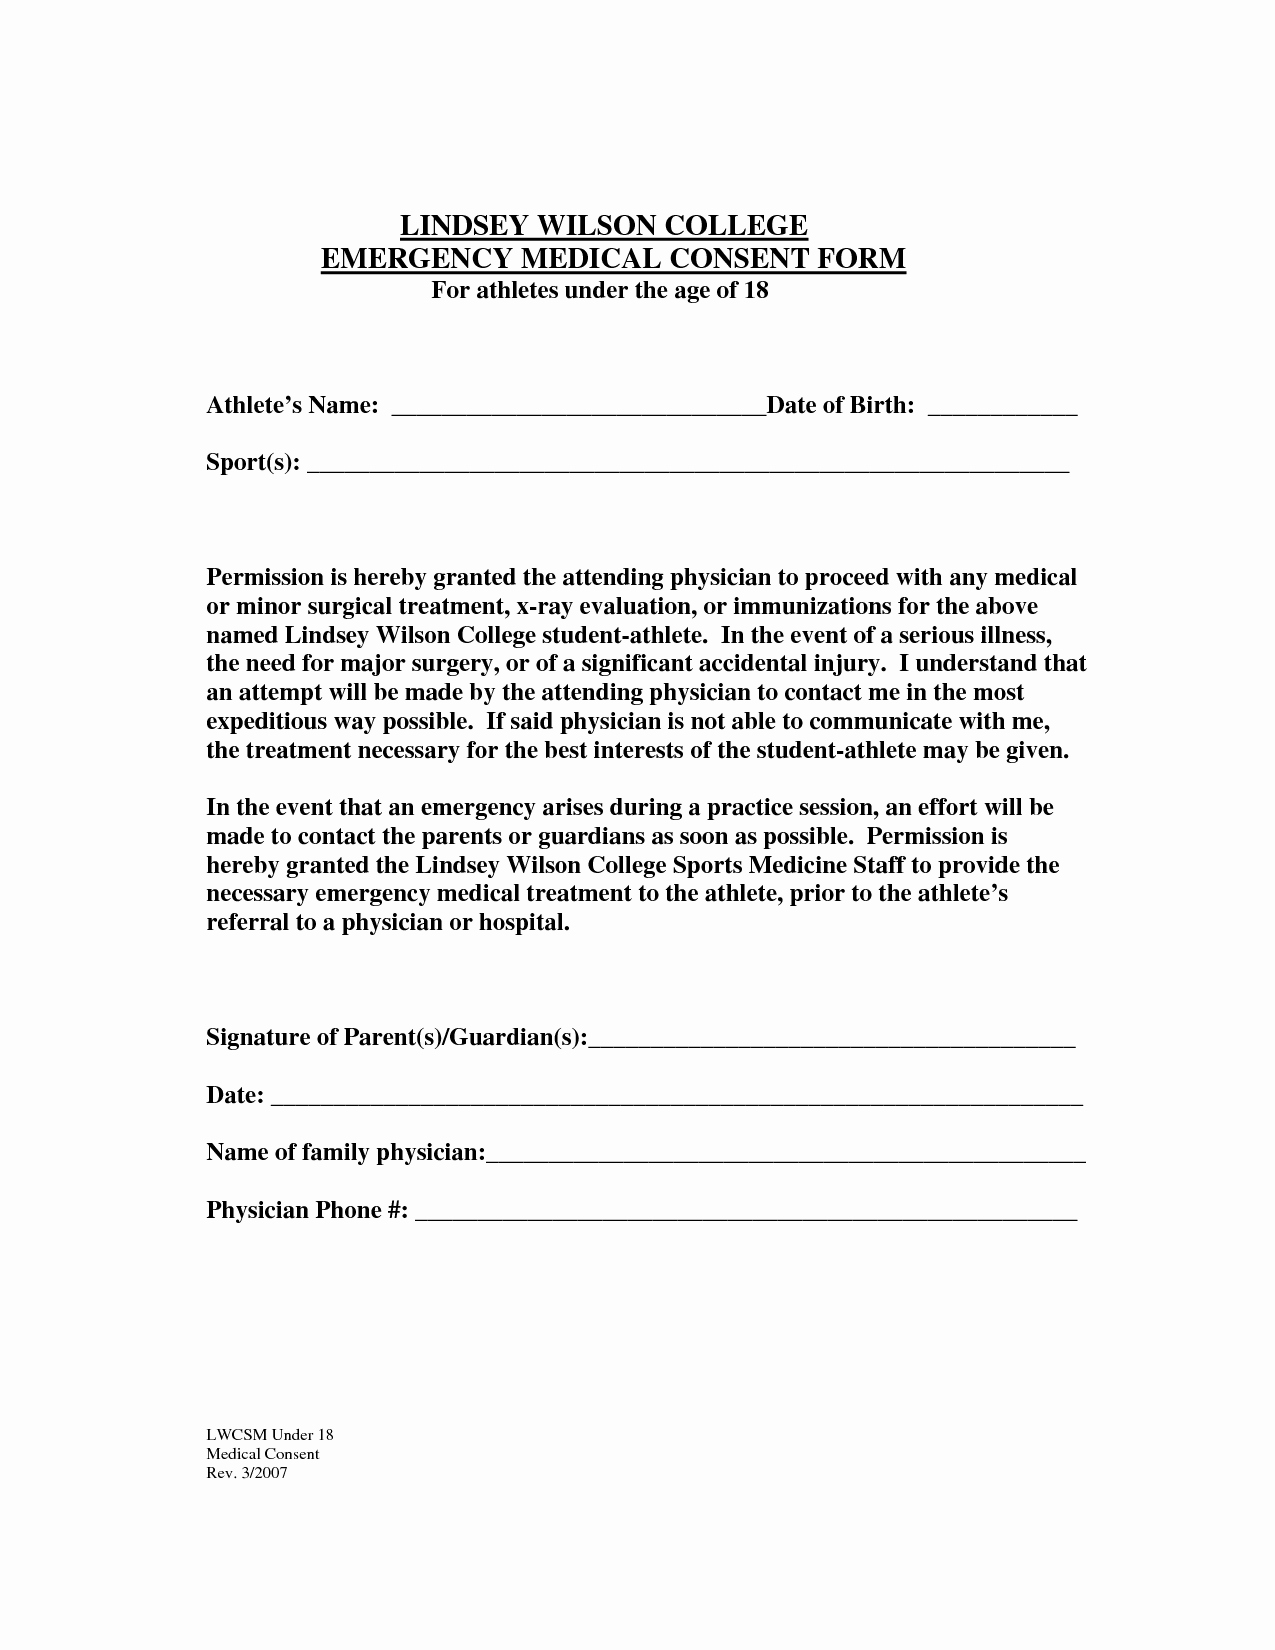 Parental Consent form for Work Luxury Generic Medical Consent form for Minor